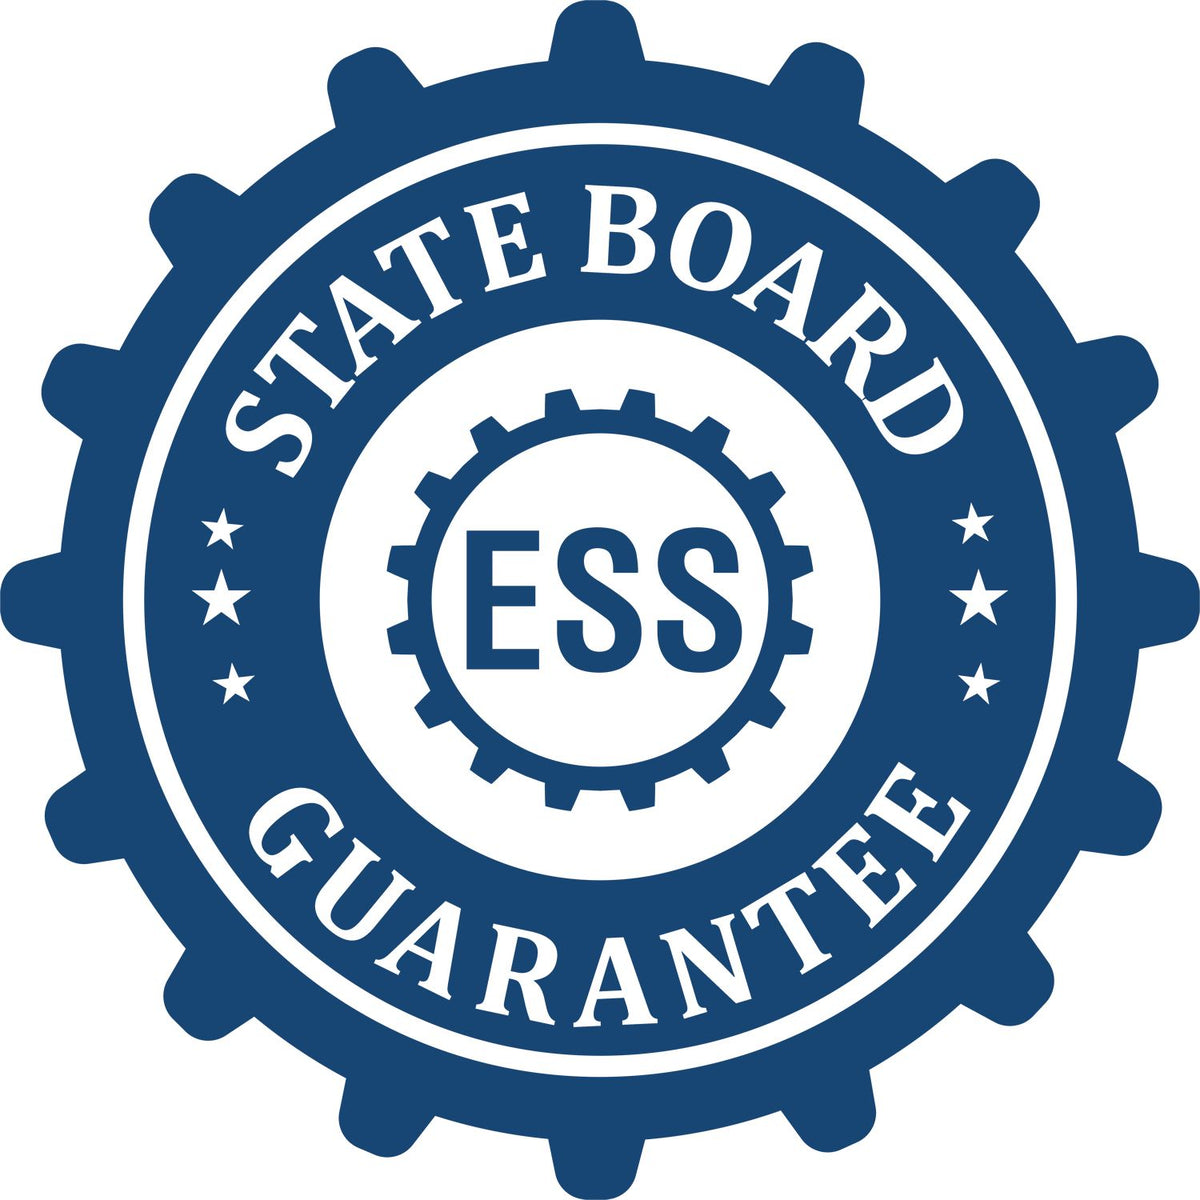 Xstamper Professional Pre-Inked Rubber Stamp of Seal 3038 State Board Guarantee